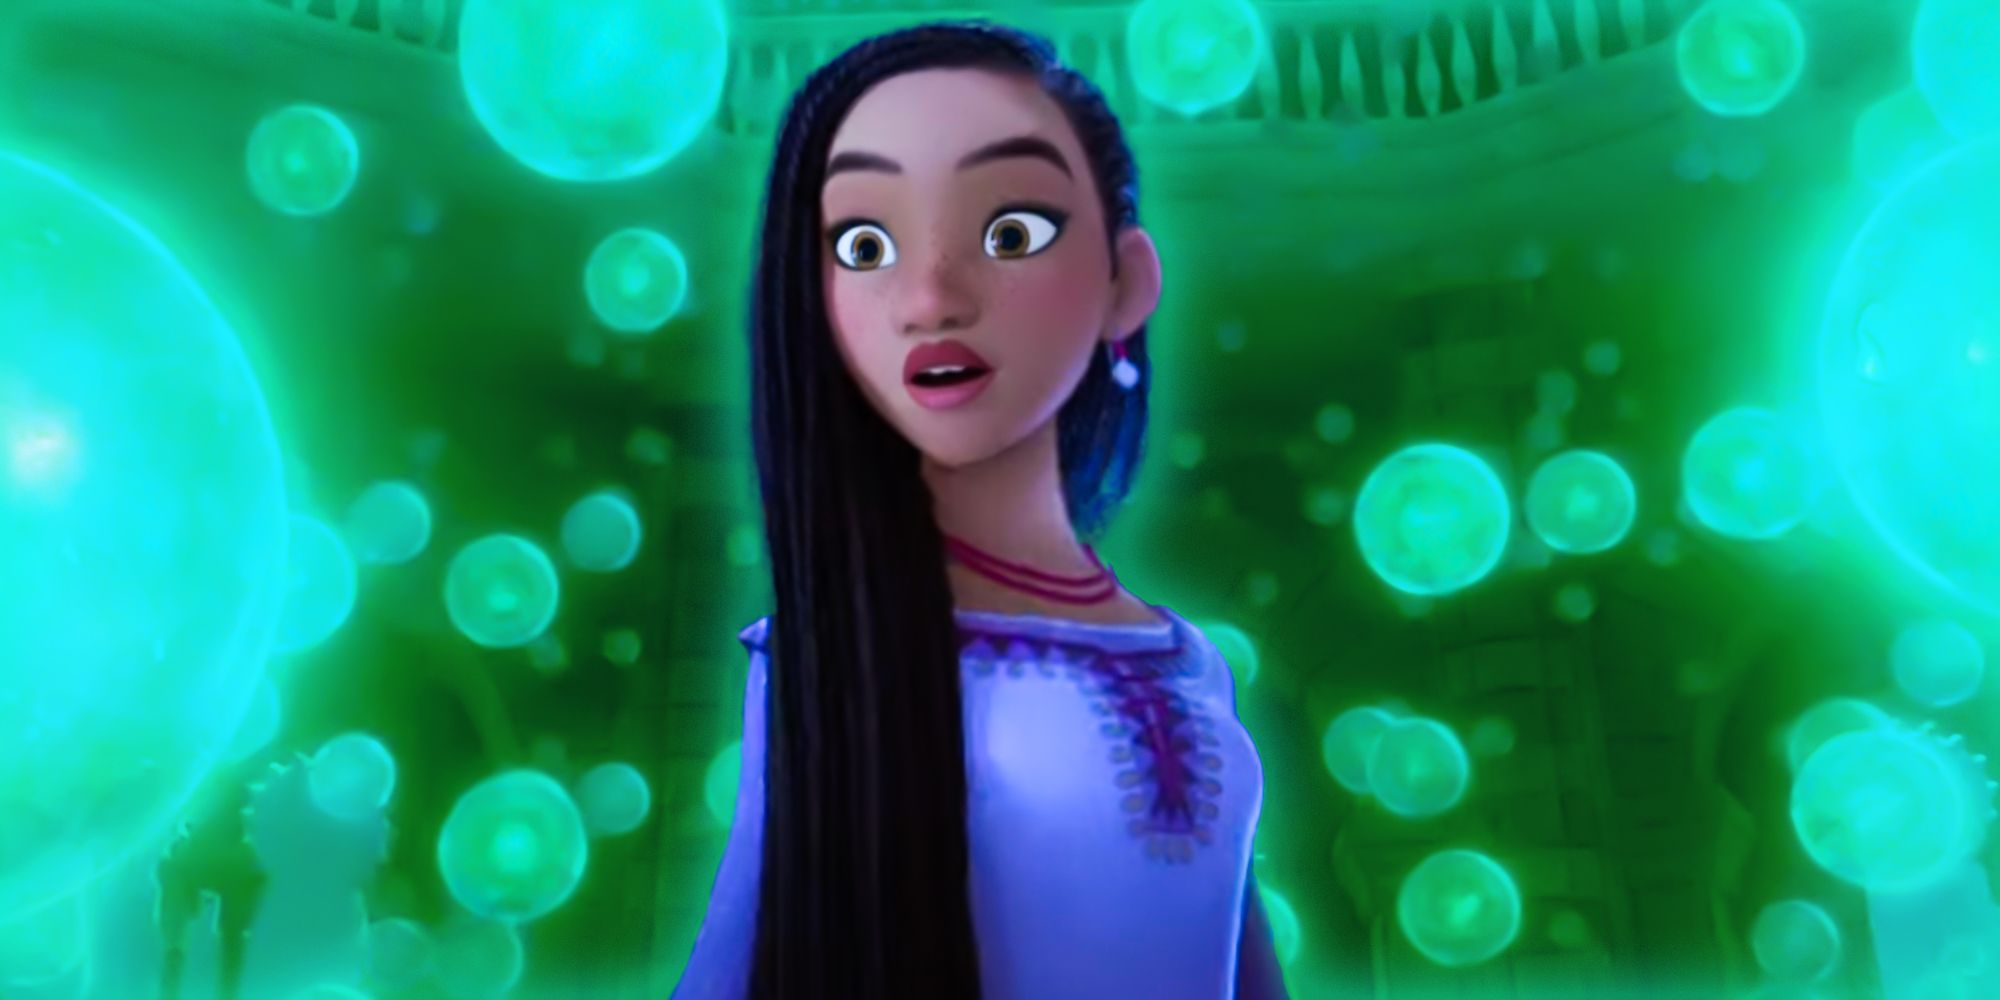 Asha standing in a room surrounded by orbs in Disney's Wish